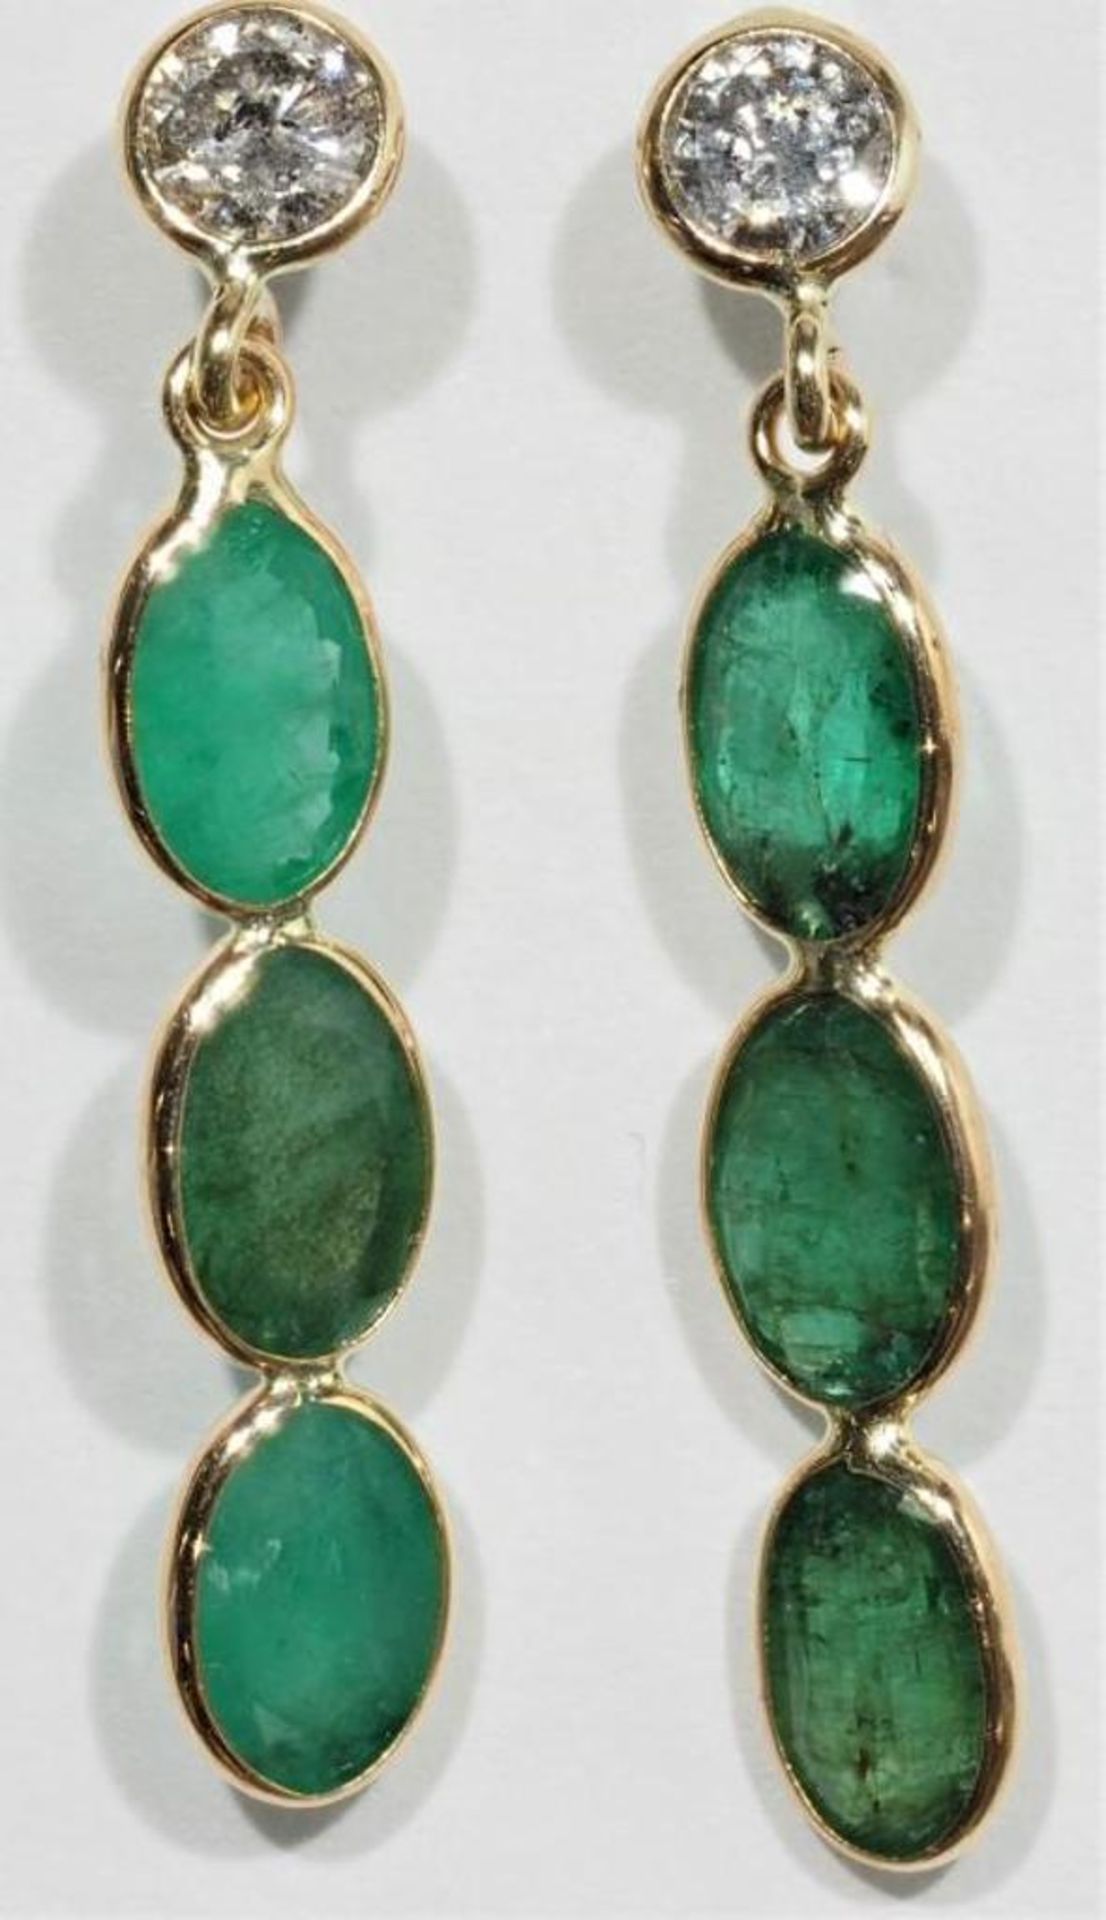 14K Yellow Gold Emerald (2.60ct) and Diamond (0.37ct) Drop Earrings. Insurance Value $3890